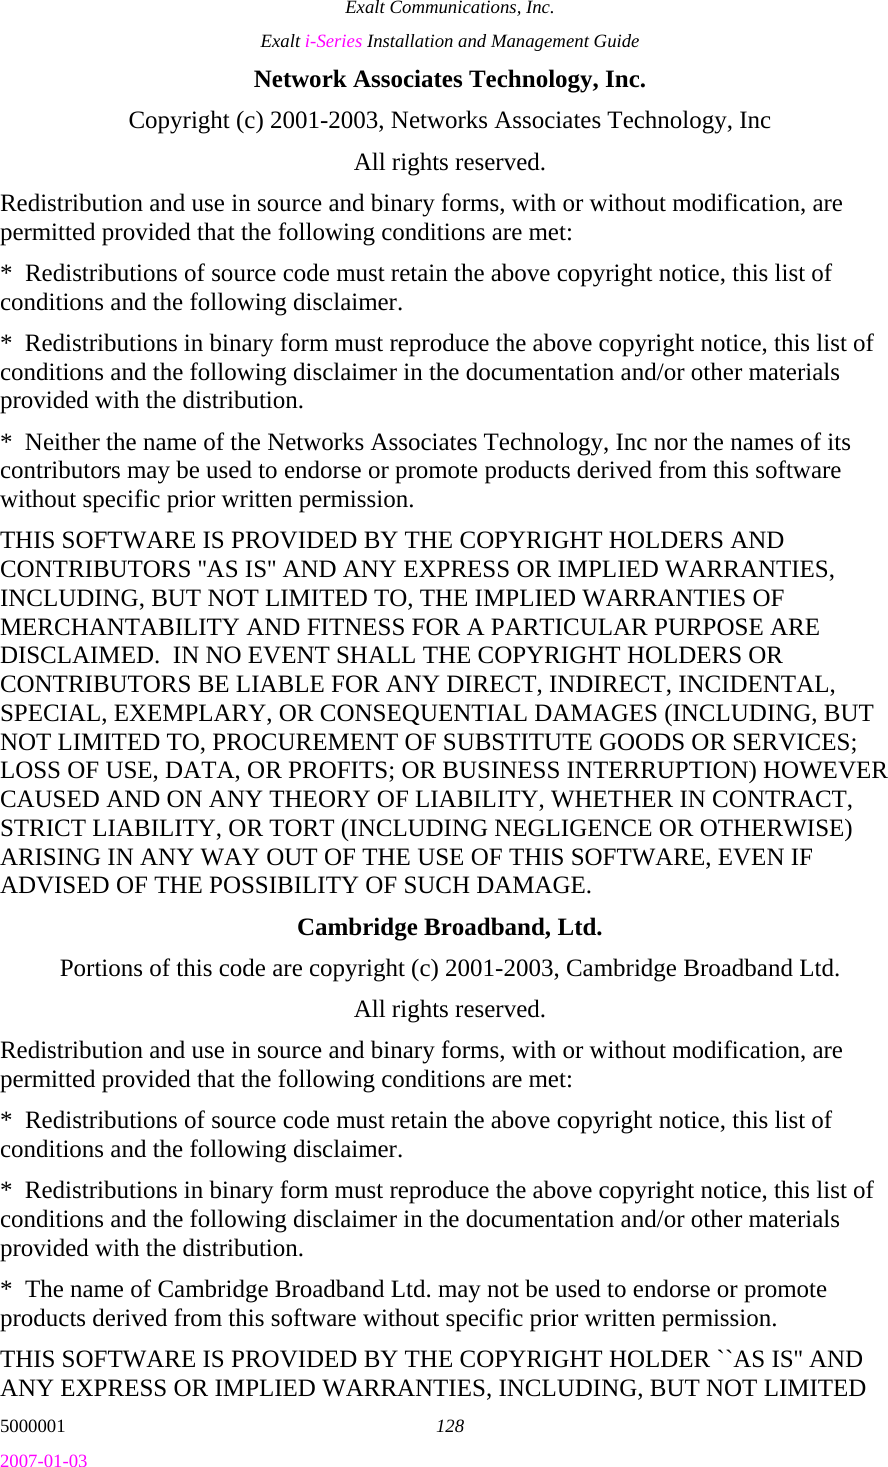 Exalt Communications, Inc. Exalt i-Series Installation and Management Guide 5000001  128 2007-01-03 Network Associates Technology, Inc. Copyright (c) 2001-2003, Networks Associates Technology, Inc All rights reserved. Redistribution and use in source and binary forms, with or without modification, are permitted provided that the following conditions are met: *  Redistributions of source code must retain the above copyright notice, this list of conditions and the following disclaimer. *  Redistributions in binary form must reproduce the above copyright notice, this list of conditions and the following disclaimer in the documentation and/or other materials provided with the distribution. *  Neither the name of the Networks Associates Technology, Inc nor the names of its contributors may be used to endorse or promote products derived from this software without specific prior written permission. THIS SOFTWARE IS PROVIDED BY THE COPYRIGHT HOLDERS AND CONTRIBUTORS &apos;&apos;AS IS&apos;&apos; AND ANY EXPRESS OR IMPLIED WARRANTIES, INCLUDING, BUT NOT LIMITED TO, THE IMPLIED WARRANTIES OF MERCHANTABILITY AND FITNESS FOR A PARTICULAR PURPOSE ARE DISCLAIMED.  IN NO EVENT SHALL THE COPYRIGHT HOLDERS OR CONTRIBUTORS BE LIABLE FOR ANY DIRECT, INDIRECT, INCIDENTAL, SPECIAL, EXEMPLARY, OR CONSEQUENTIAL DAMAGES (INCLUDING, BUT NOT LIMITED TO, PROCUREMENT OF SUBSTITUTE GOODS OR SERVICES; LOSS OF USE, DATA, OR PROFITS; OR BUSINESS INTERRUPTION) HOWEVER CAUSED AND ON ANY THEORY OF LIABILITY, WHETHER IN CONTRACT, STRICT LIABILITY, OR TORT (INCLUDING NEGLIGENCE OR OTHERWISE) ARISING IN ANY WAY OUT OF THE USE OF THIS SOFTWARE, EVEN IF ADVISED OF THE POSSIBILITY OF SUCH DAMAGE. Cambridge Broadband, Ltd. Portions of this code are copyright (c) 2001-2003, Cambridge Broadband Ltd. All rights reserved. Redistribution and use in source and binary forms, with or without modification, are permitted provided that the following conditions are met: *  Redistributions of source code must retain the above copyright notice, this list of conditions and the following disclaimer. *  Redistributions in binary form must reproduce the above copyright notice, this list of conditions and the following disclaimer in the documentation and/or other materials provided with the distribution. *  The name of Cambridge Broadband Ltd. may not be used to endorse or promote products derived from this software without specific prior written permission. THIS SOFTWARE IS PROVIDED BY THE COPYRIGHT HOLDER ``AS IS&apos;&apos; AND ANY EXPRESS OR IMPLIED WARRANTIES, INCLUDING, BUT NOT LIMITED 